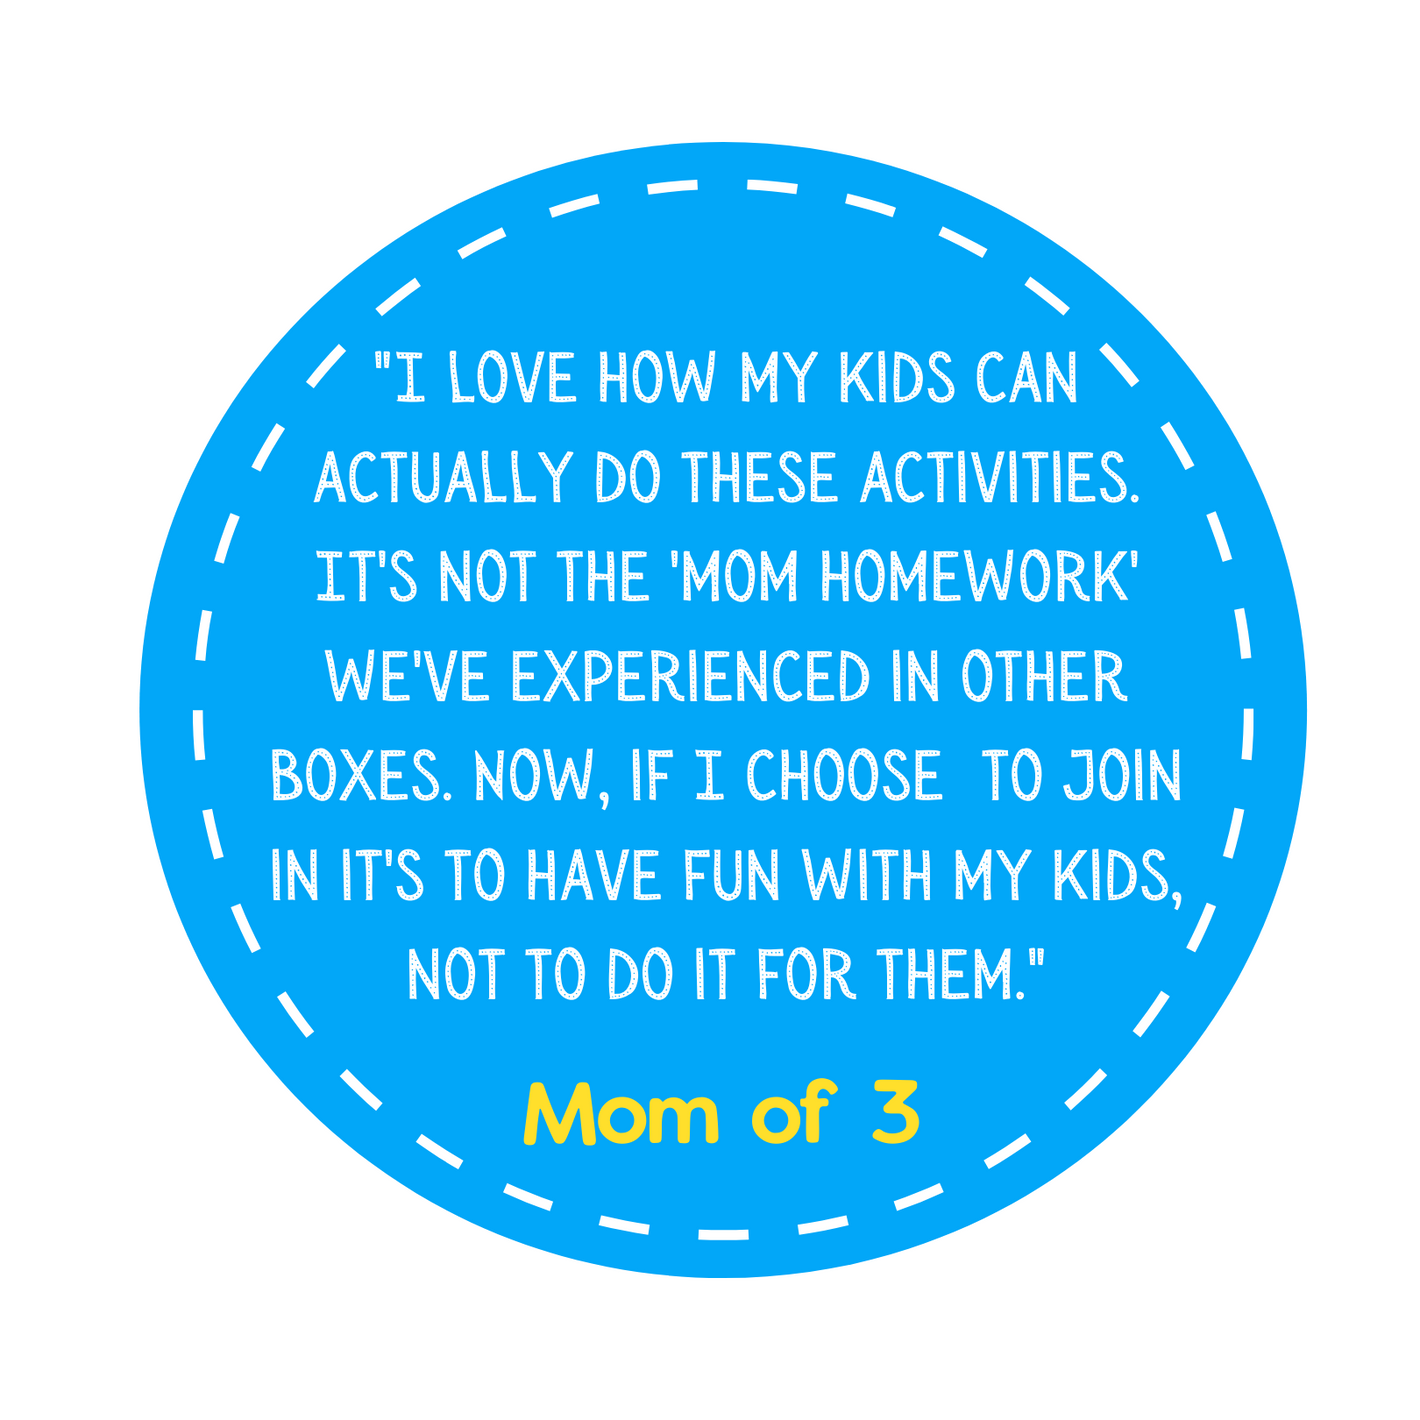 "I love how my kids can actually do these activities. It's not the 'mom homework' we've experienced in other boxes. Now, if I choose  to join in it's to have fun with my kids, not to do it for them." Mom of 3